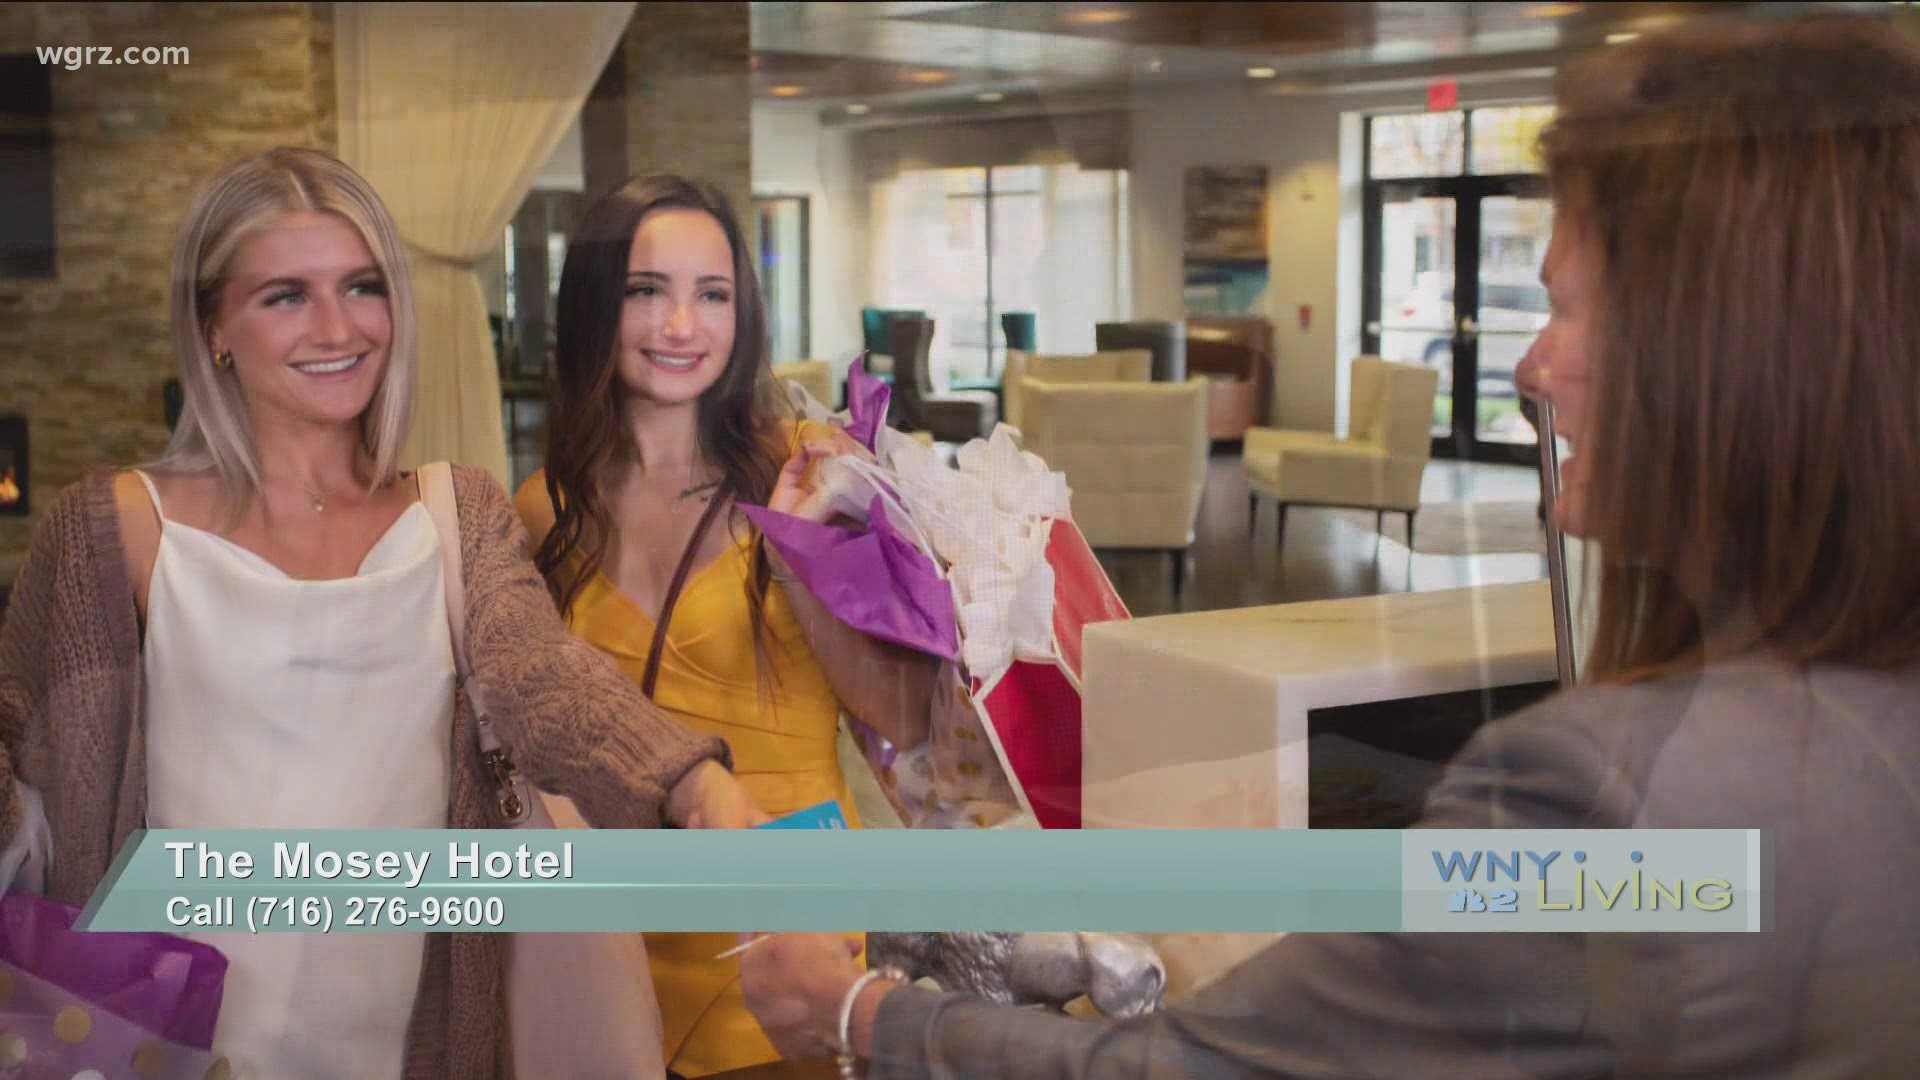 WNY Living - January 23 - The Mosey Hotel (THIS VIDEO IS SPONSORED BY THE MOSEY HOTEL)